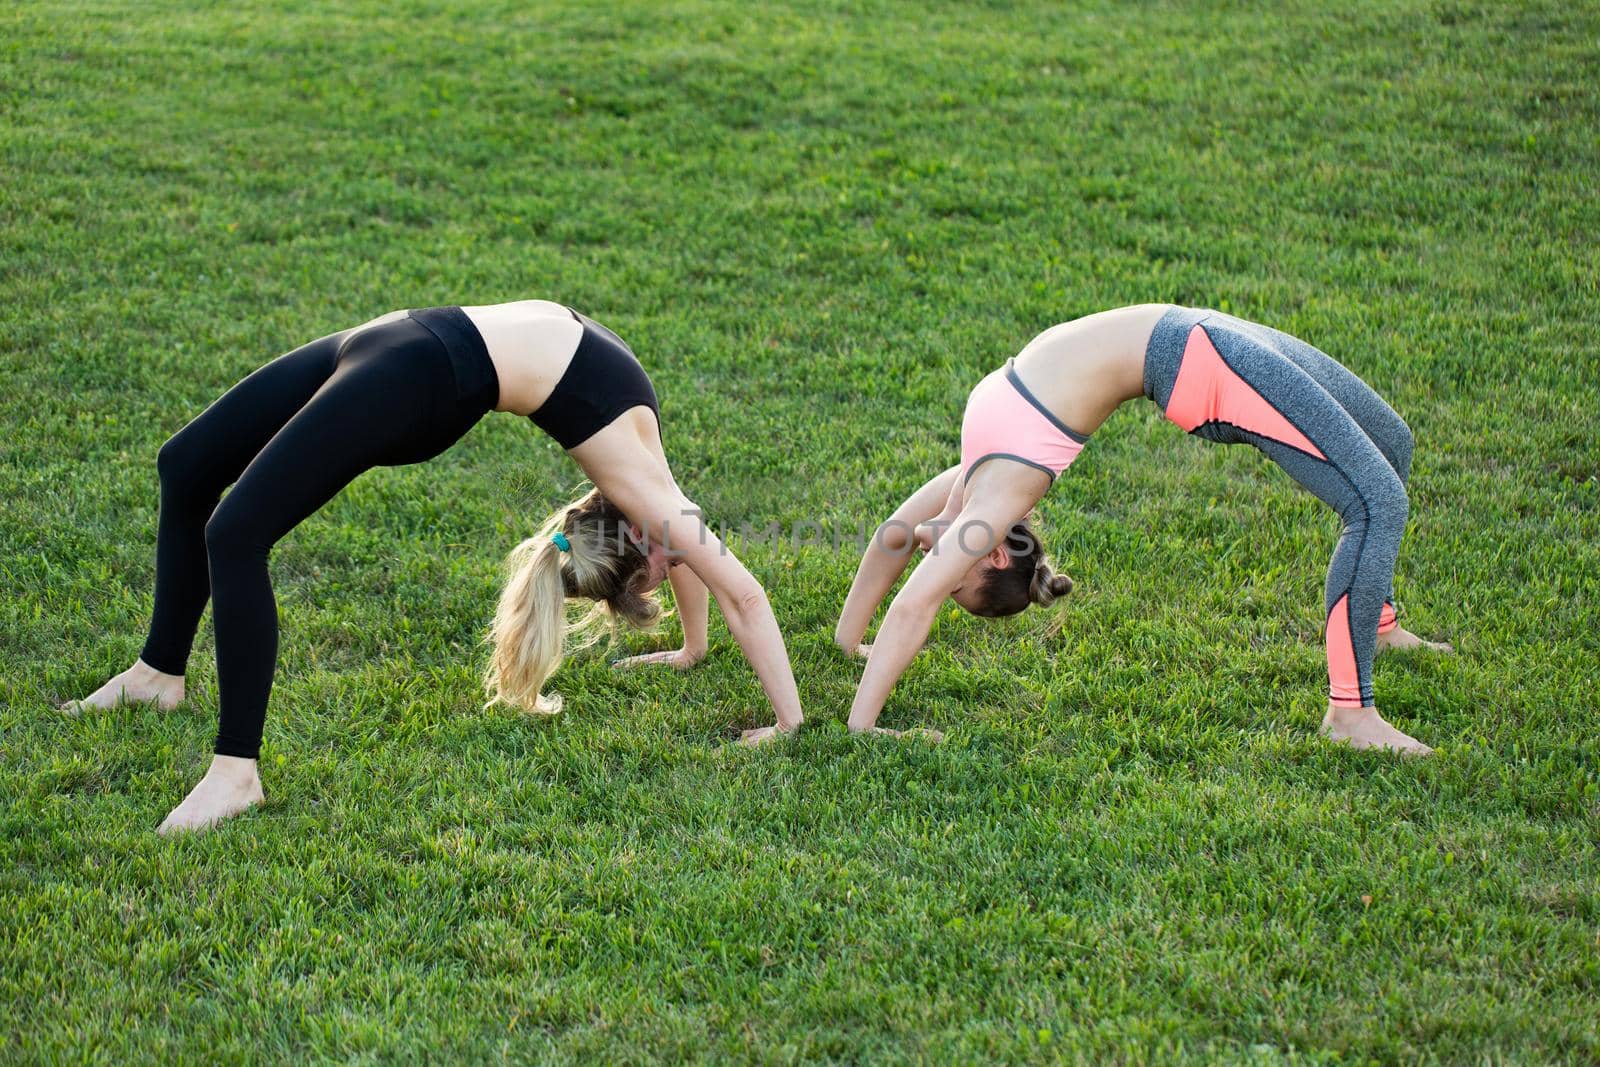 Girlfriends practice yoga in the park on the grass